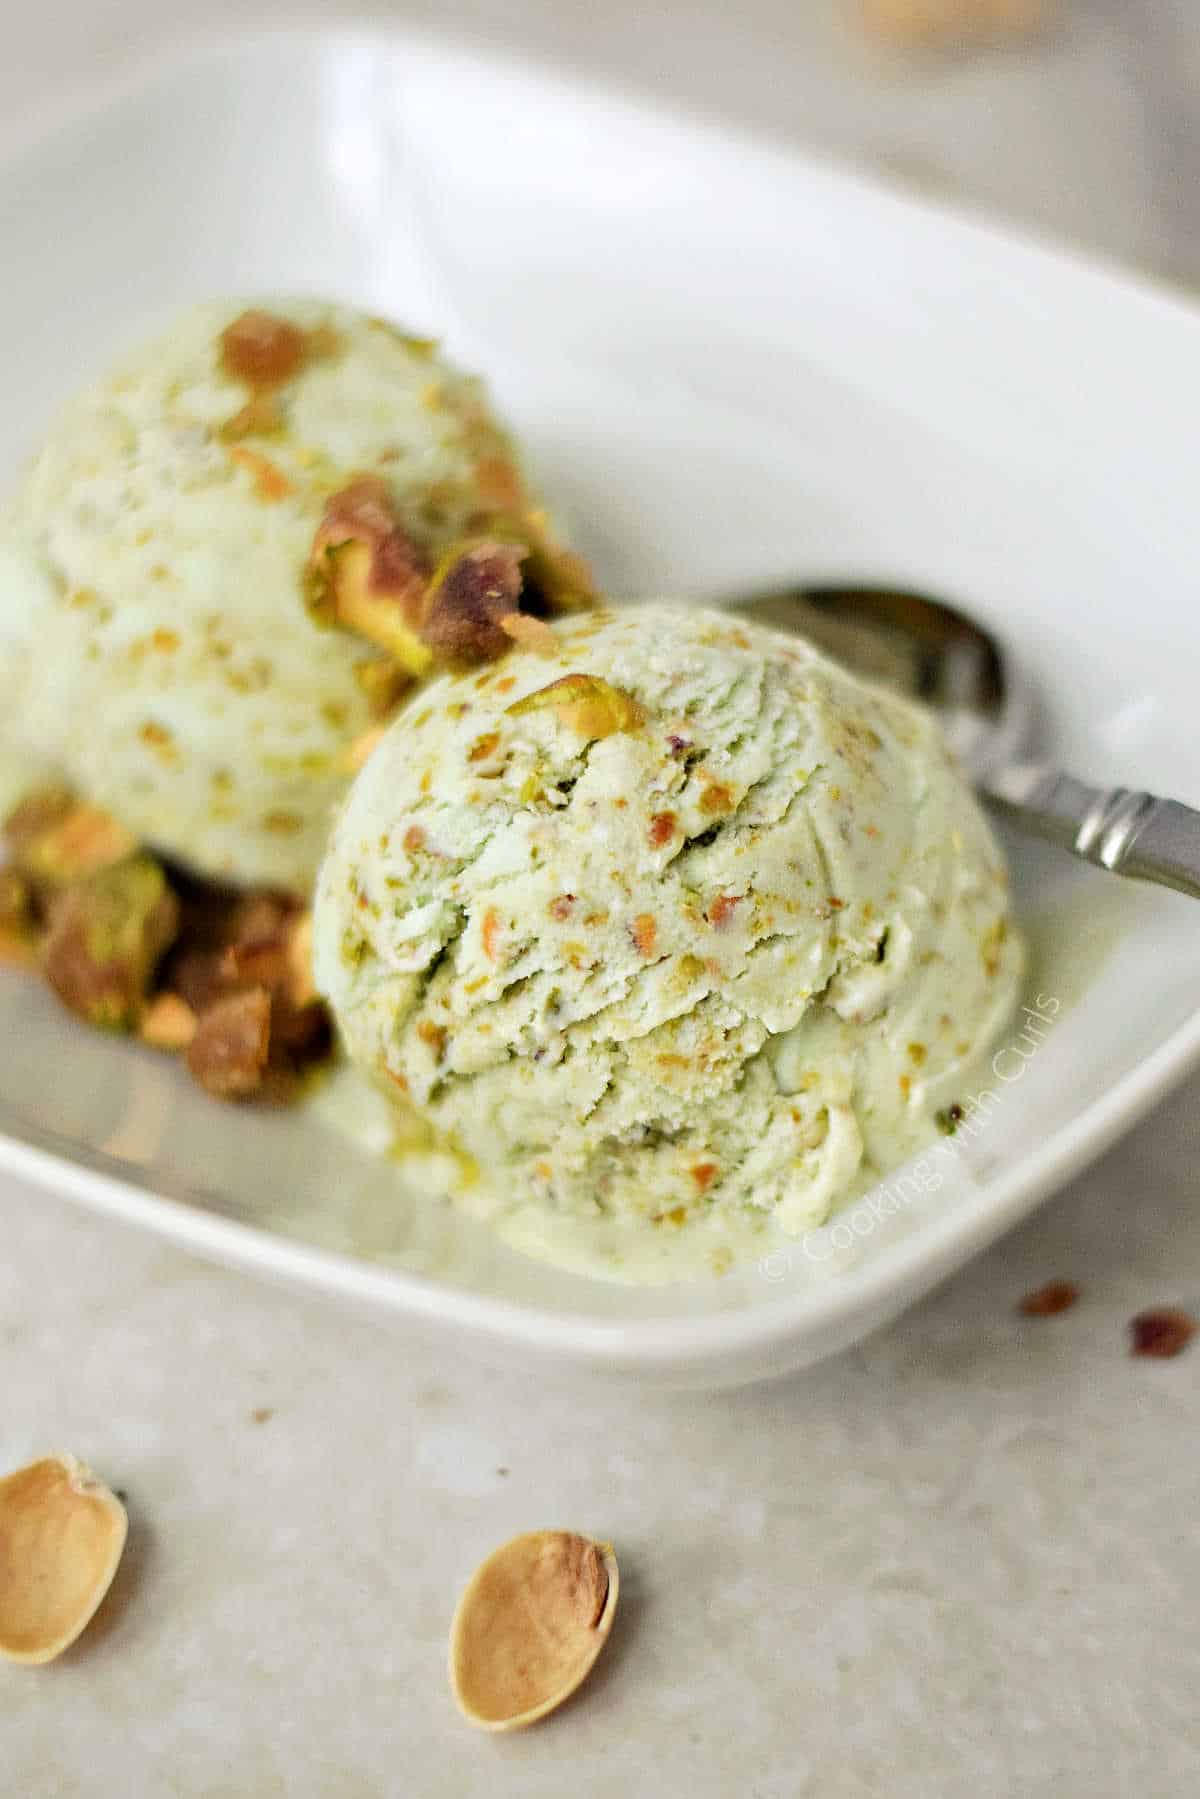 Pistachio Ice Cream topped with Pistachio Praline in a white rectangle dish with a spoon on the side.